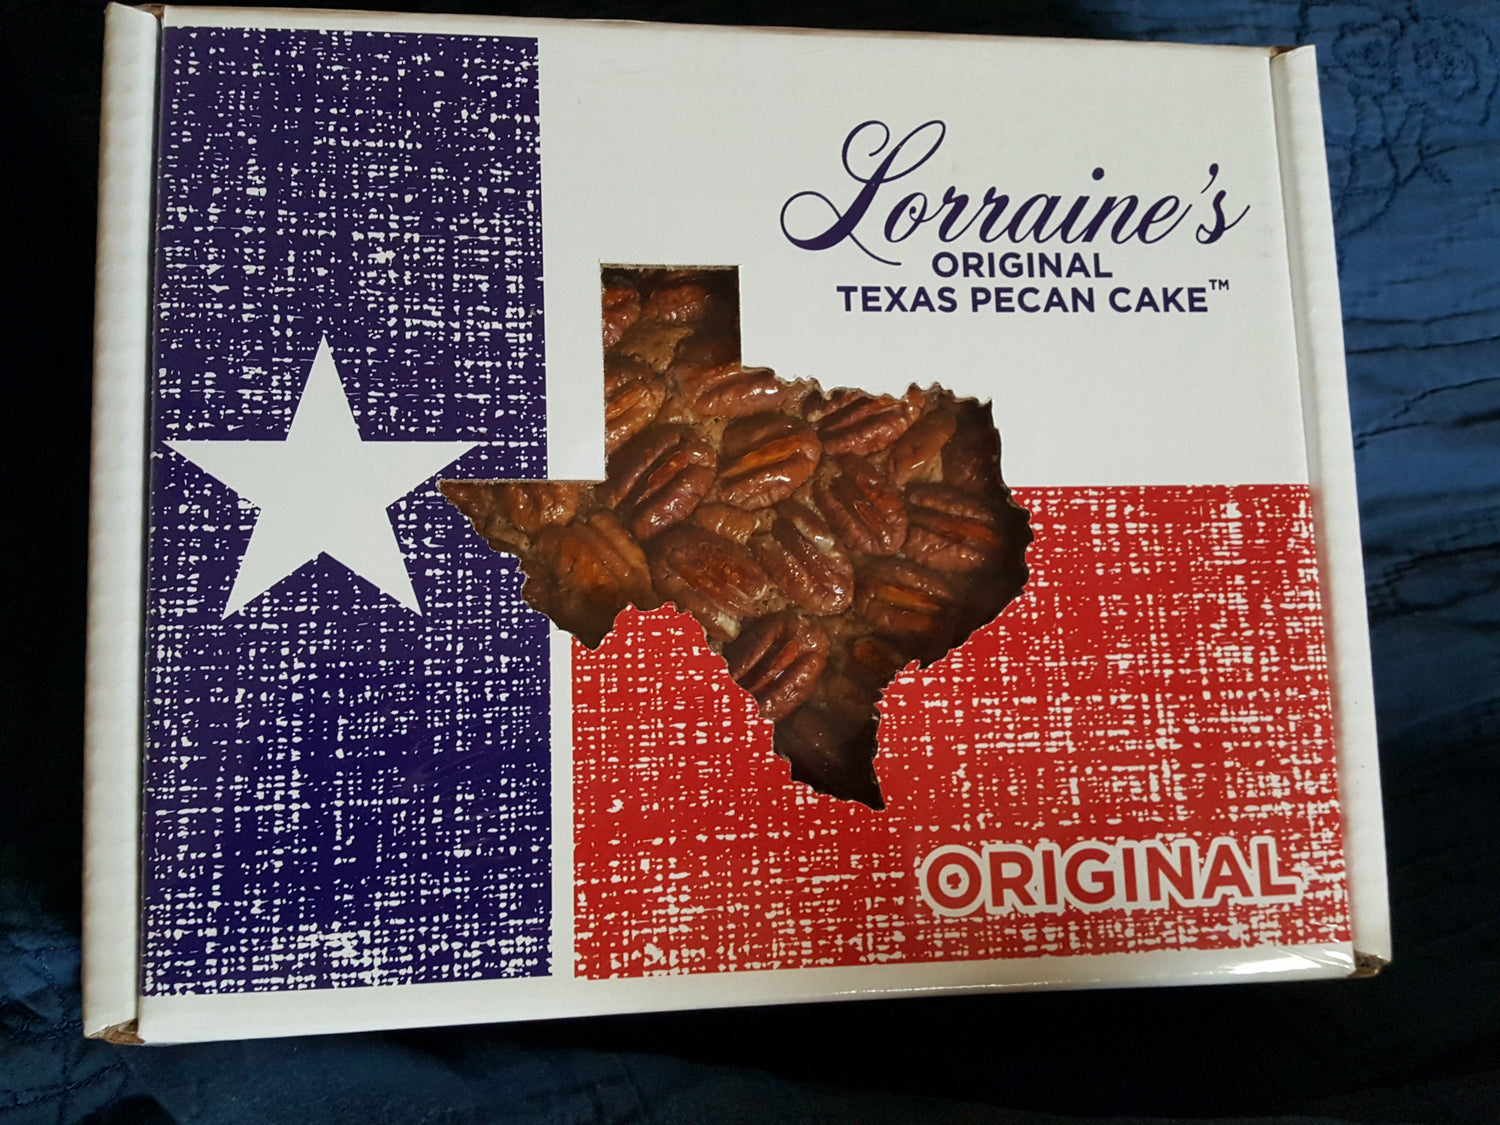 The Best Texas Themed Gift to Delight Your Loved Ones